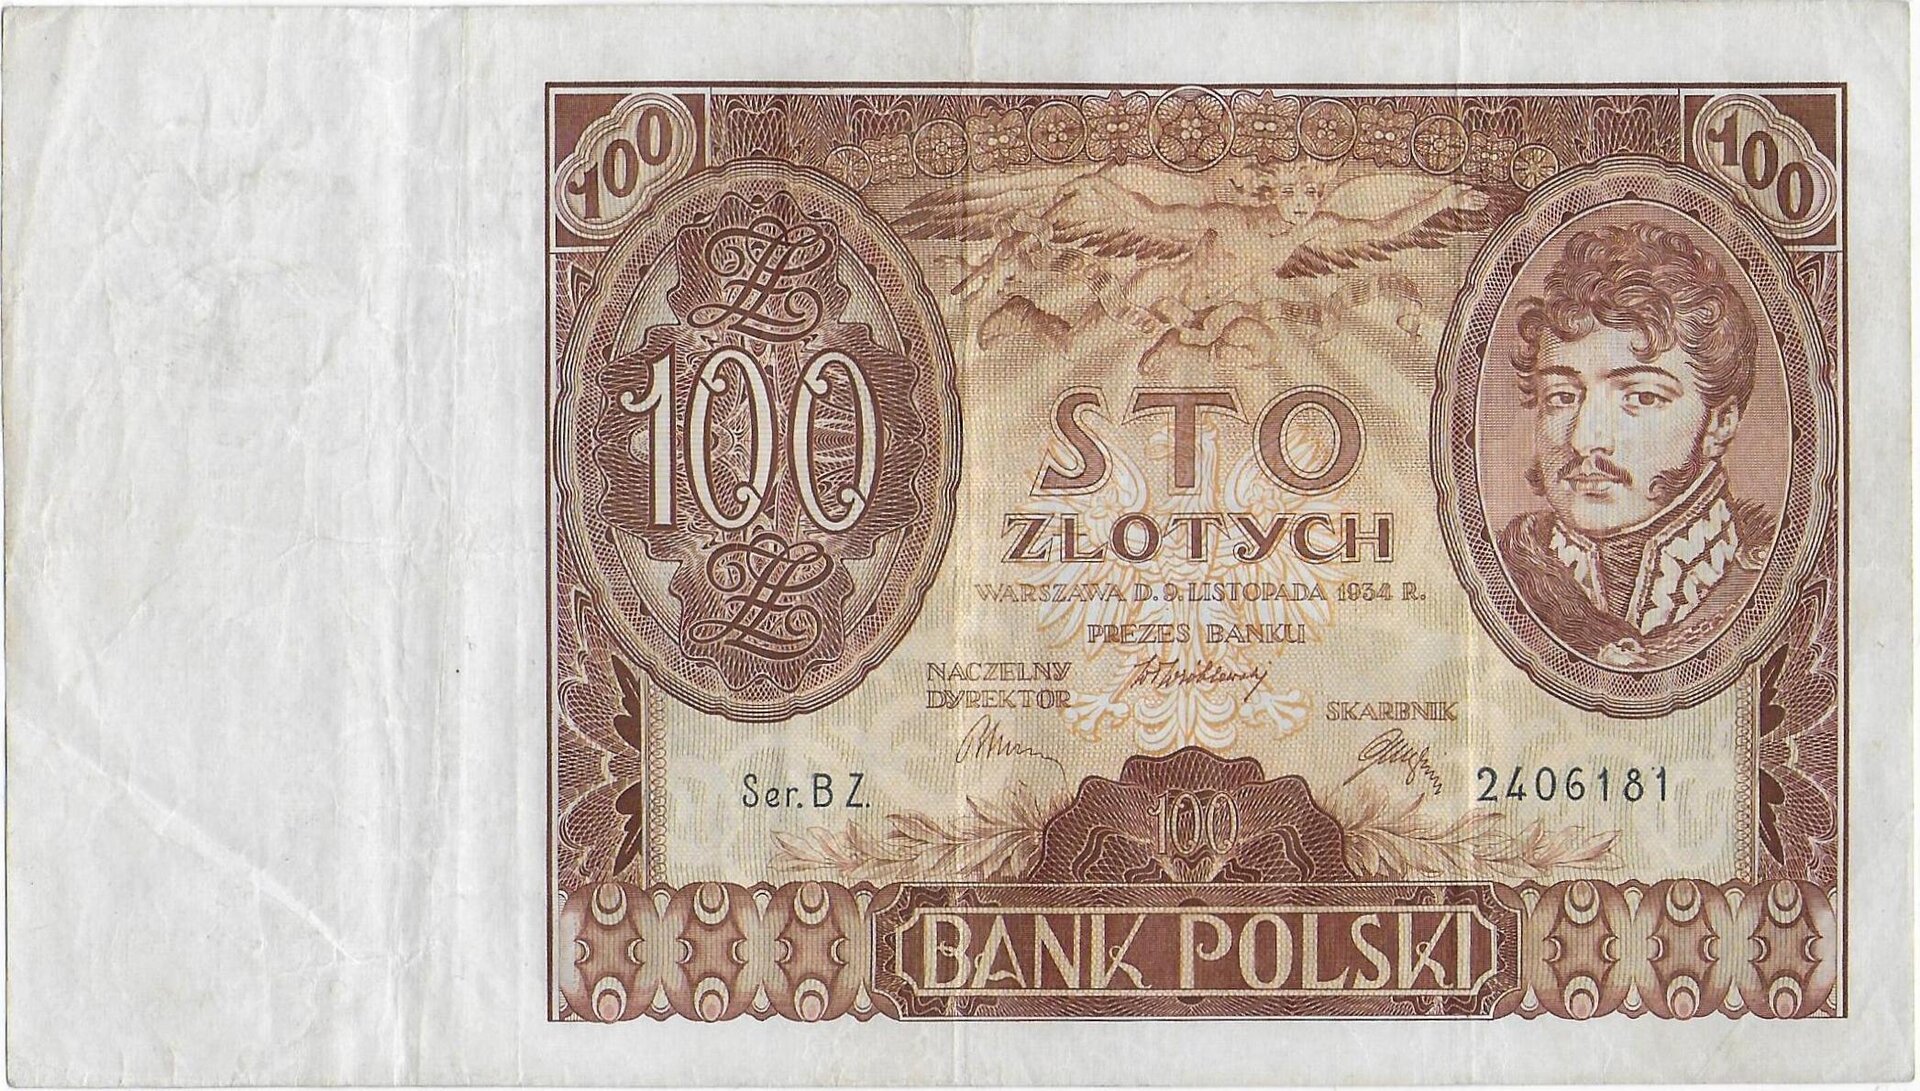 POLAND   100 Zlotych  1934     P.74a front.jpg